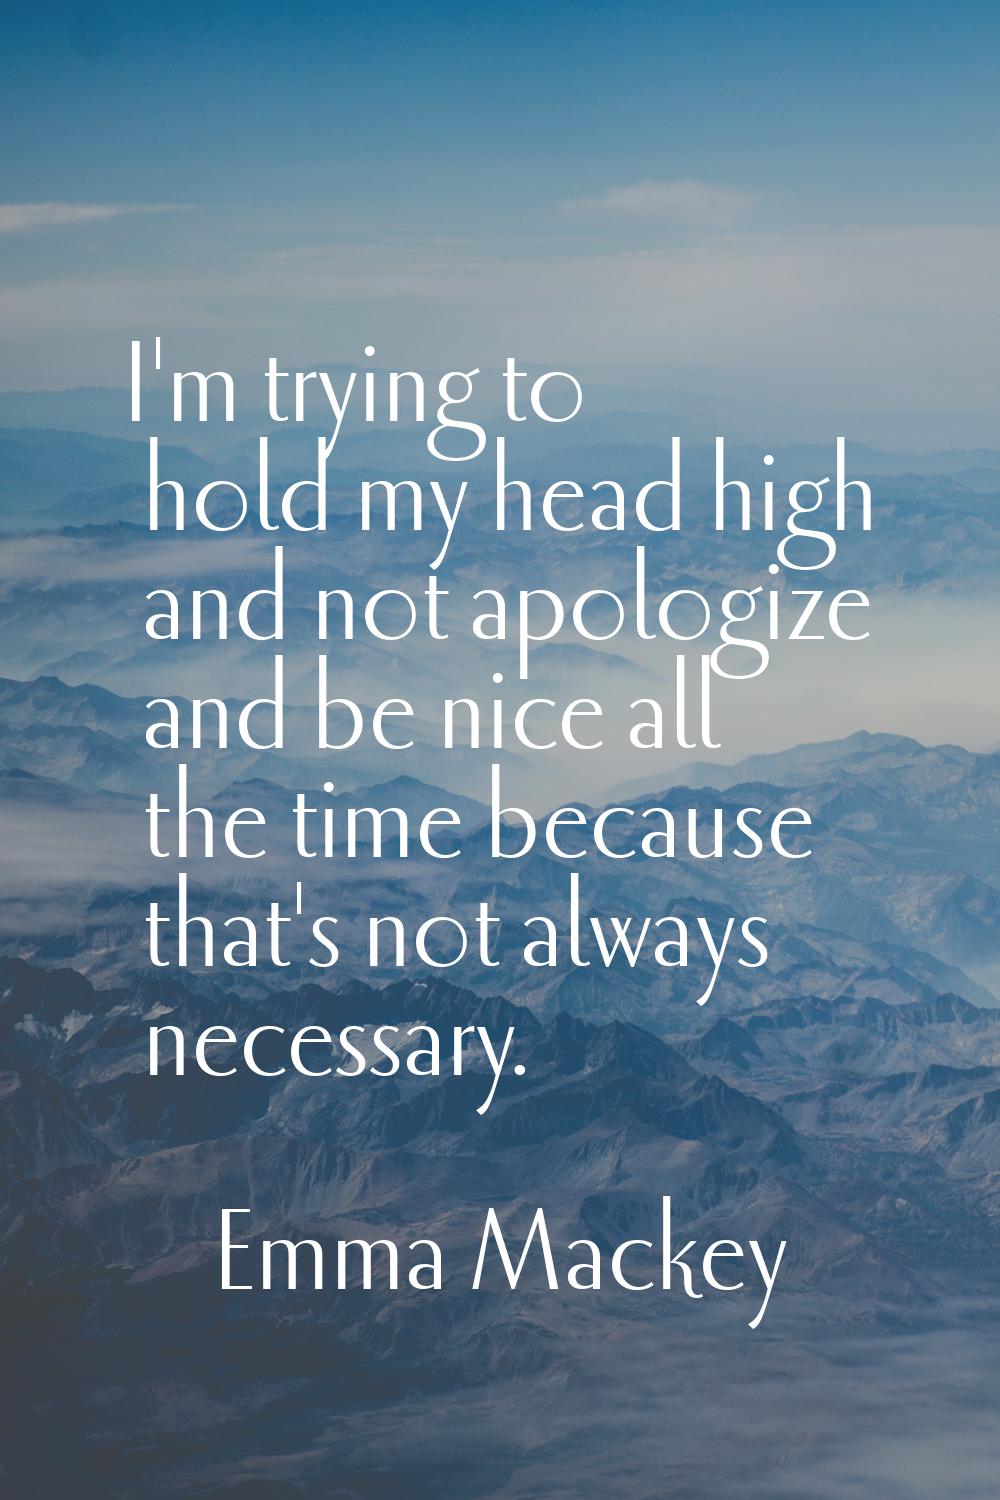 I'm trying to hold my head high and not apologize and be nice all the time because that's not alway